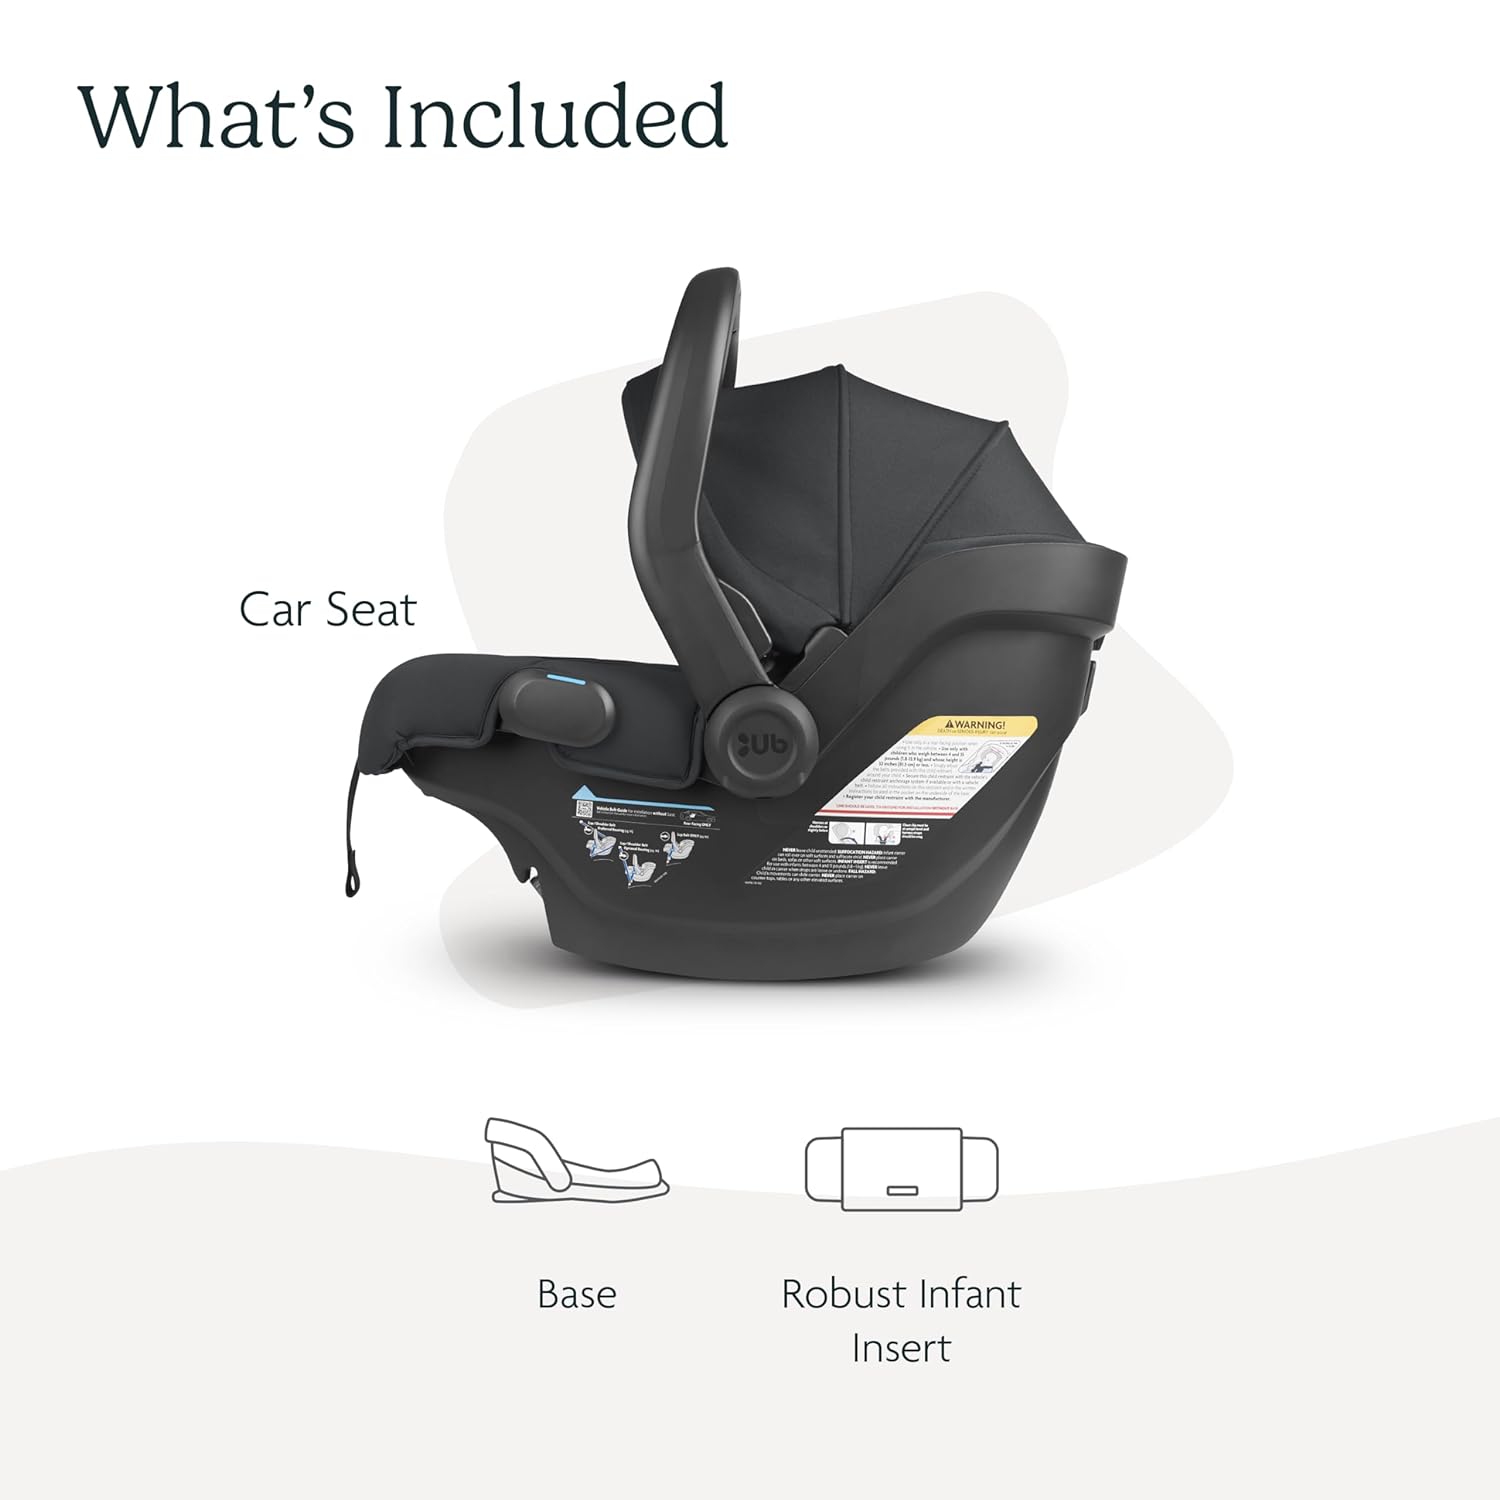 UPPAbaby Vista V2 Stroller / Convertible Single-To-Double System / Bassinet, Toddler Seat, Bug Shield, Rain Shield, and Storage Bag Included / Jake (Charcoal/Carbon Frame/Black Leather) - Convertible Single-To-Double System Review